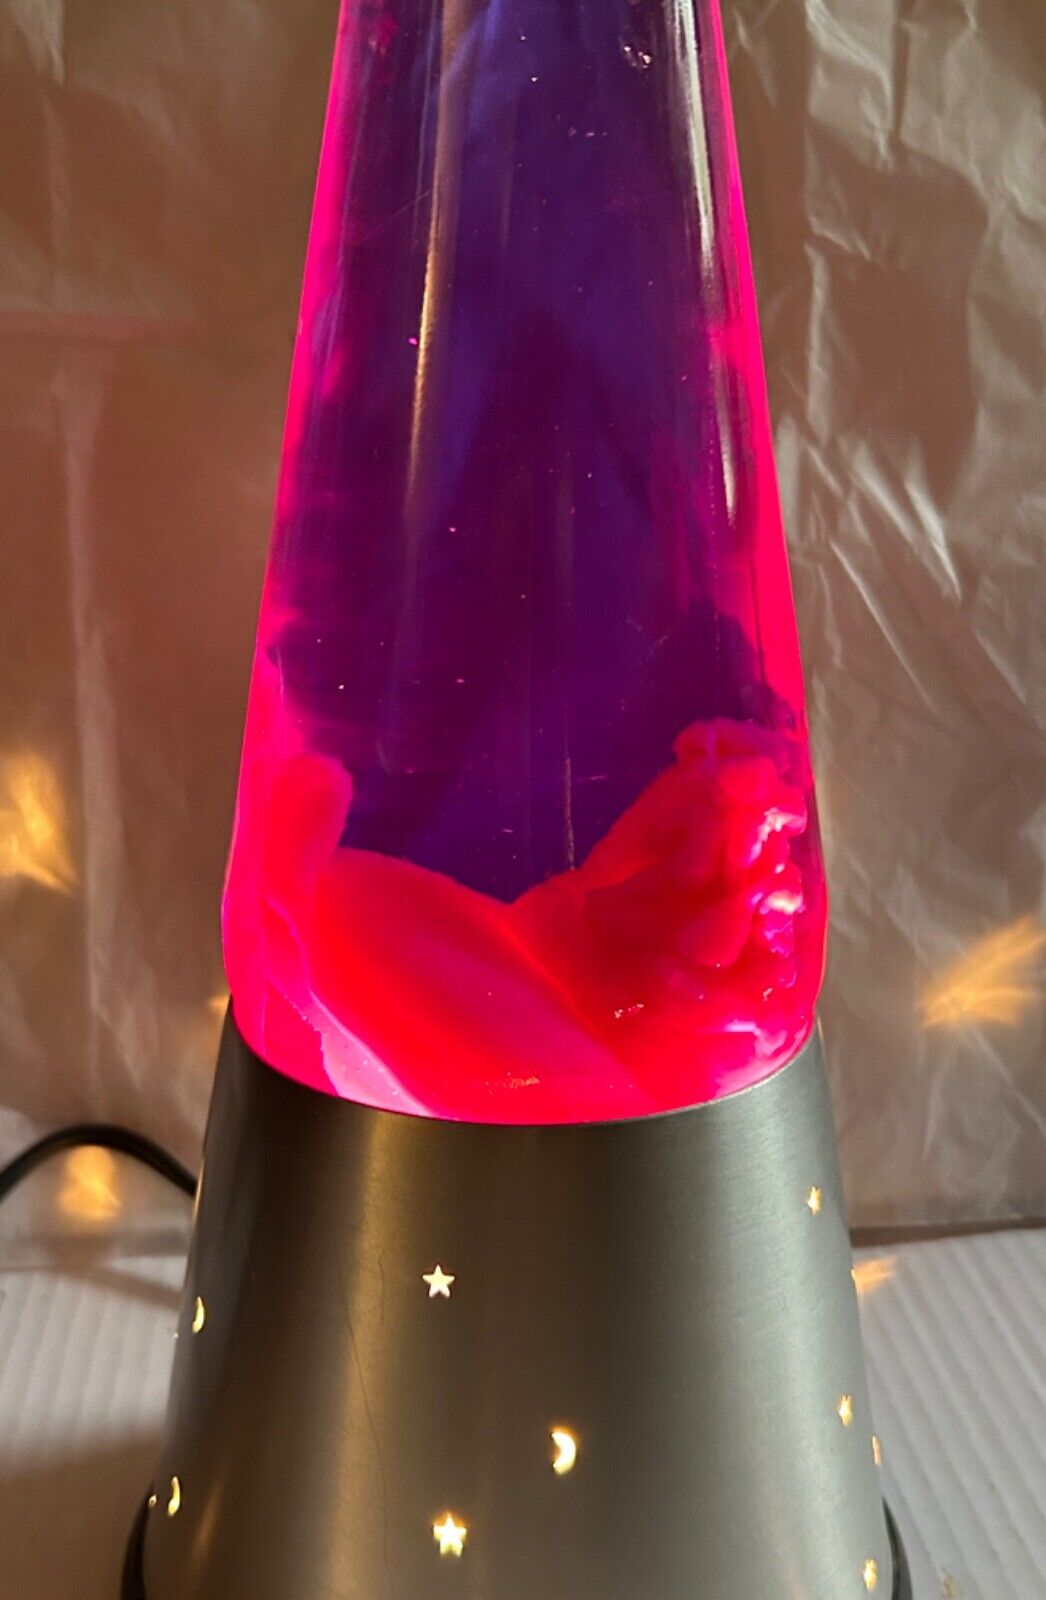 SILVER MOON AND STARS PURPLE AND PINK STUNNING LAVA LAMP 15” TALL